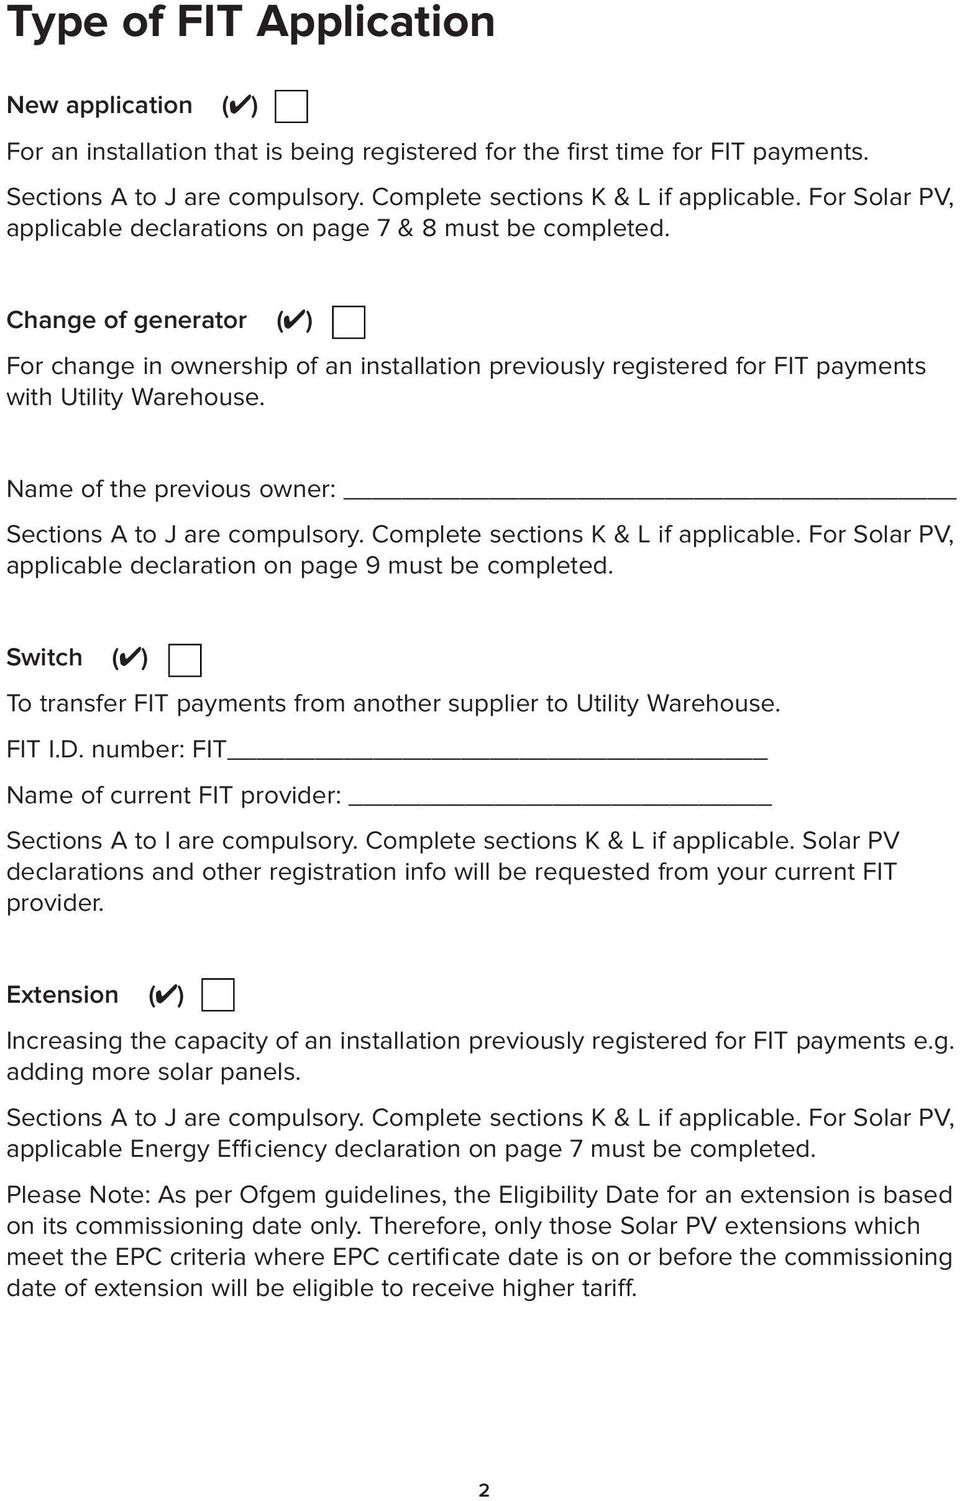 Name of the previous owner: Sections A to J are compulsory. Complete sections K & L if applicable. For Solar PV, applicable declaration on page 9 must be completed.